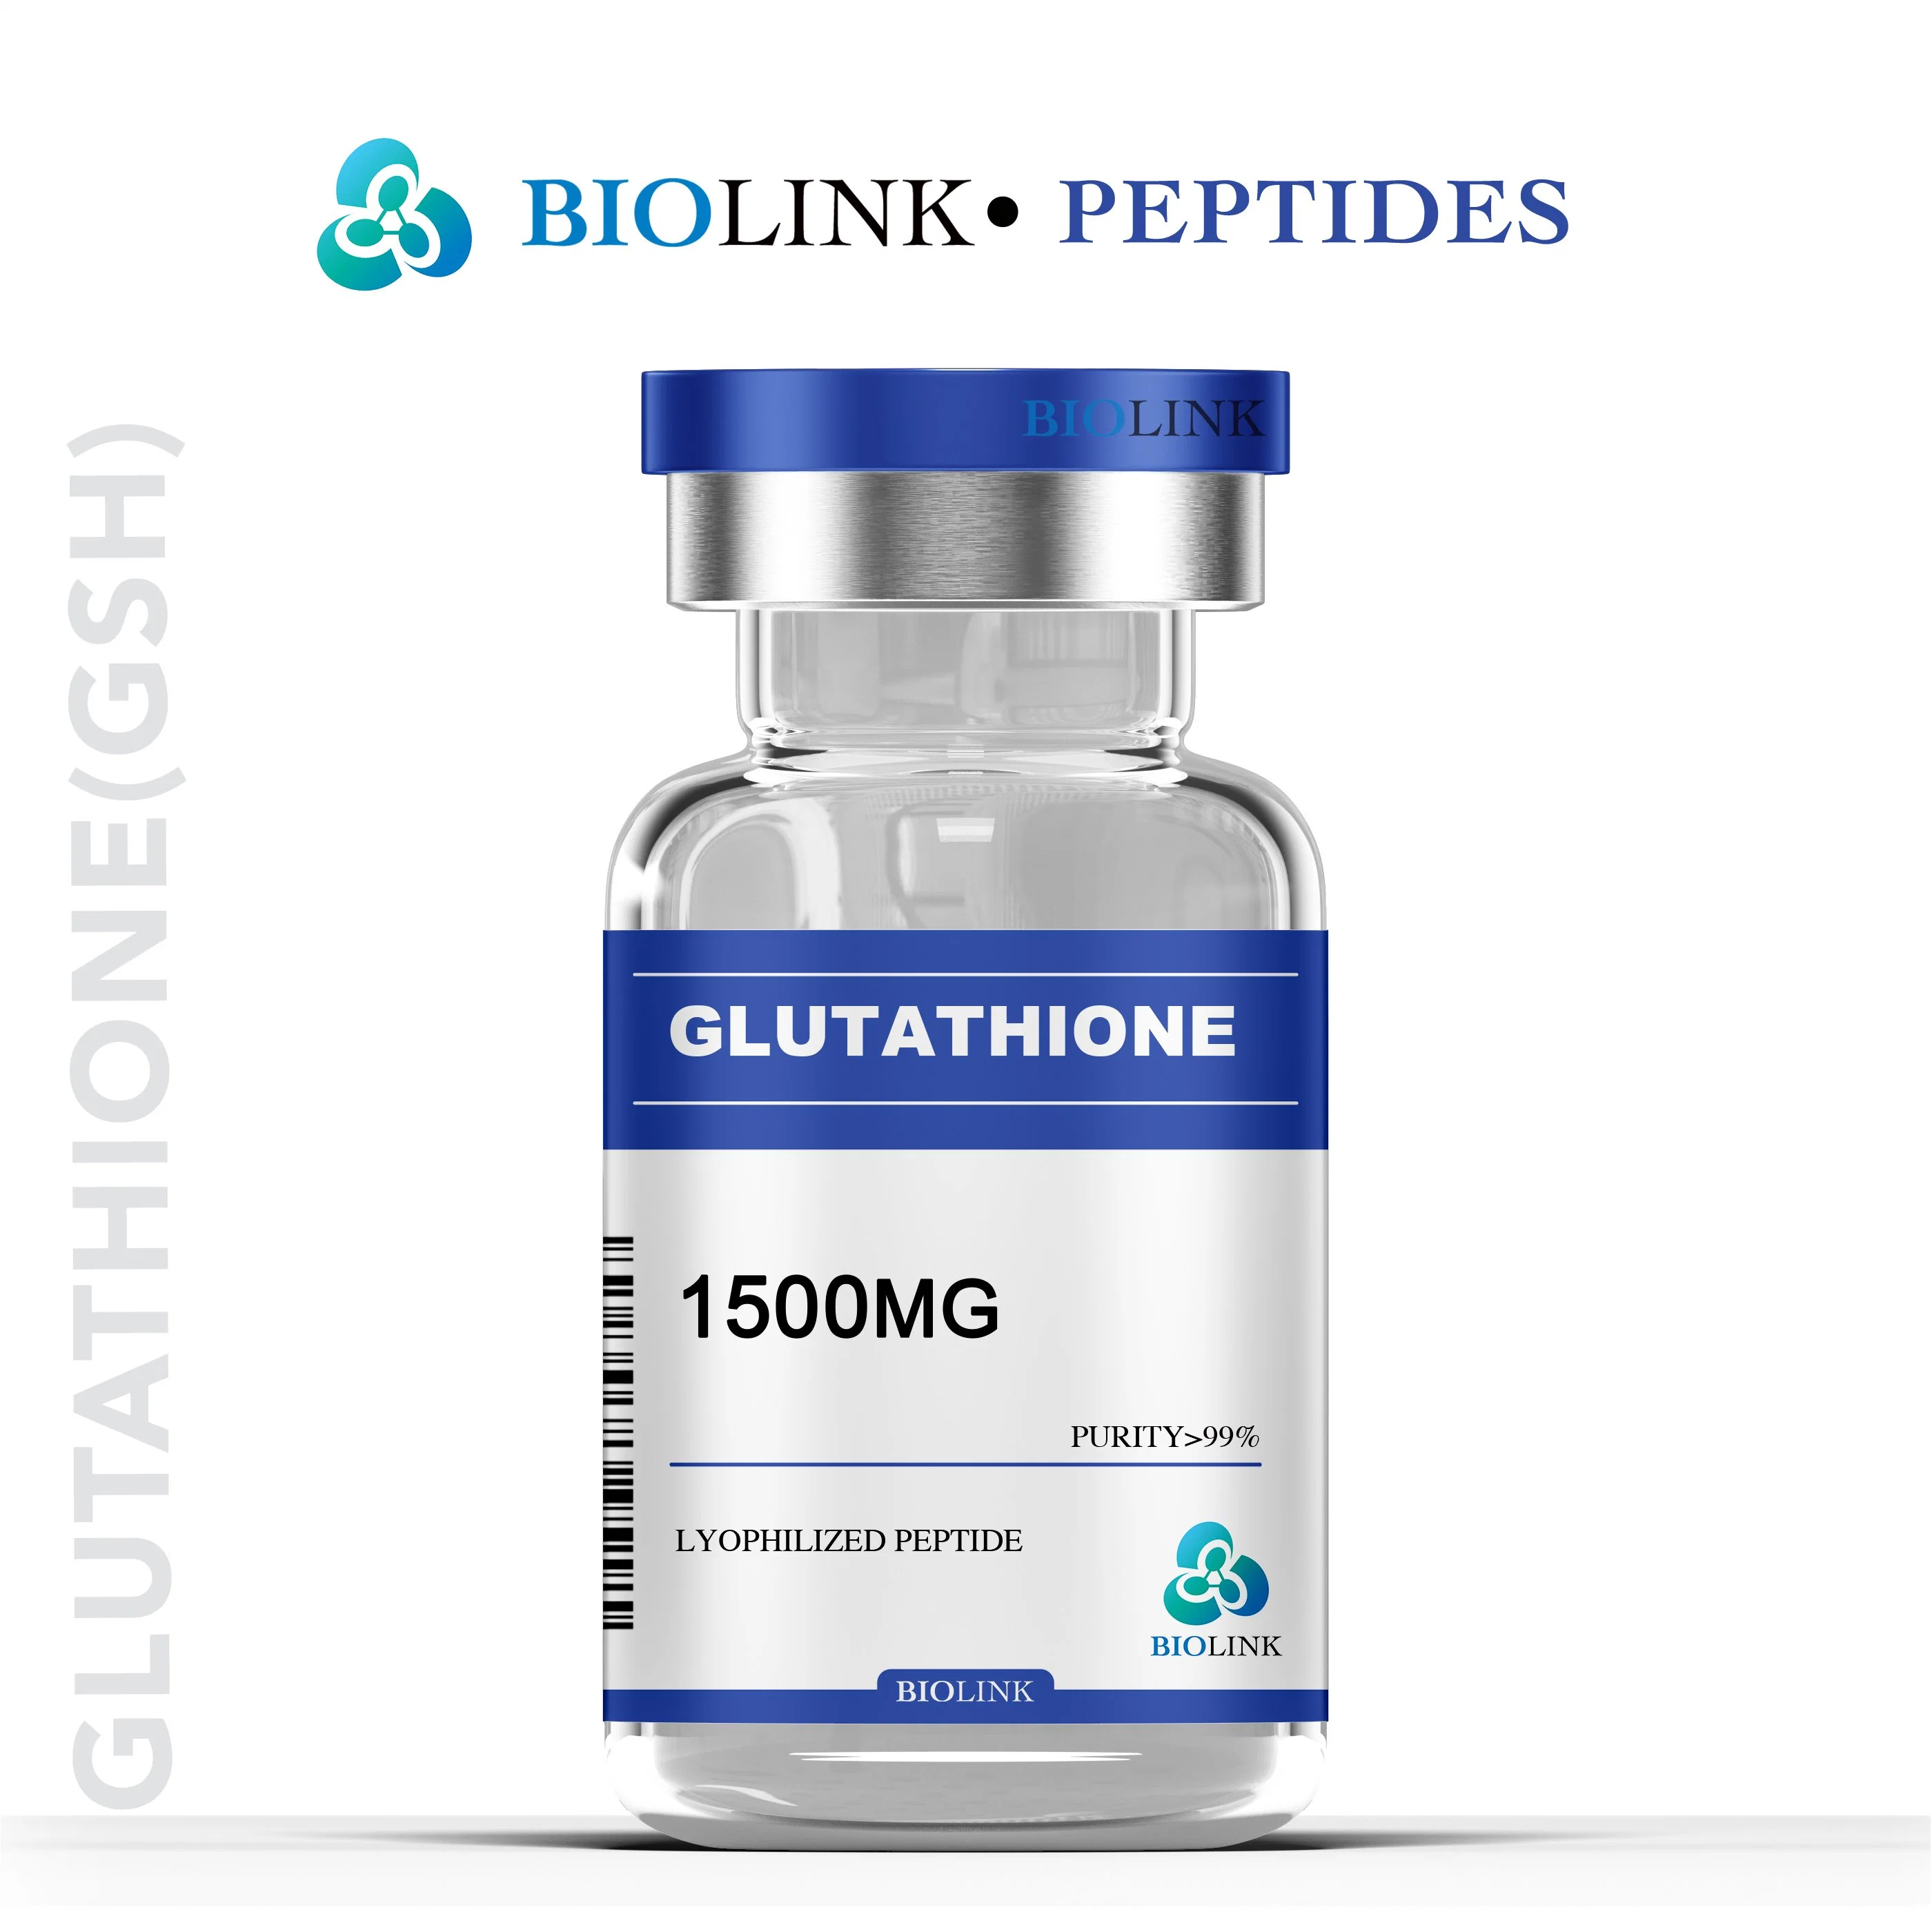 Nad+ IV Infusion Glutathione 1500mg for Antiaging UK Warehouse Door by Door CAS: 70-18-8